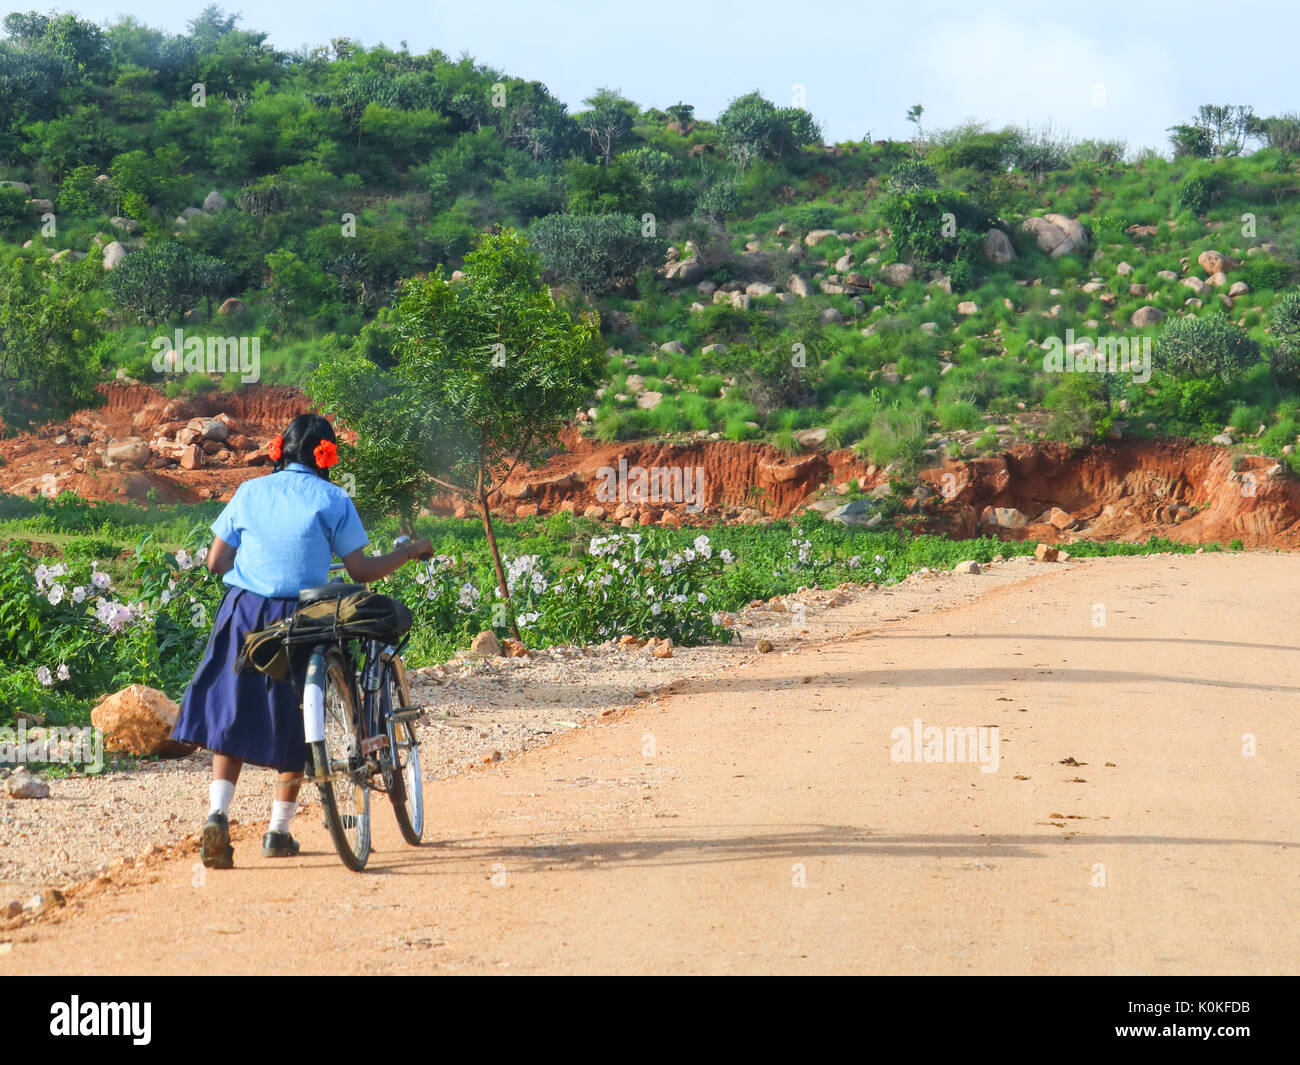 A girl child going to school on a sunny day with her bicycle. A school bag of the child can also be seen in the picture. Stock Photo